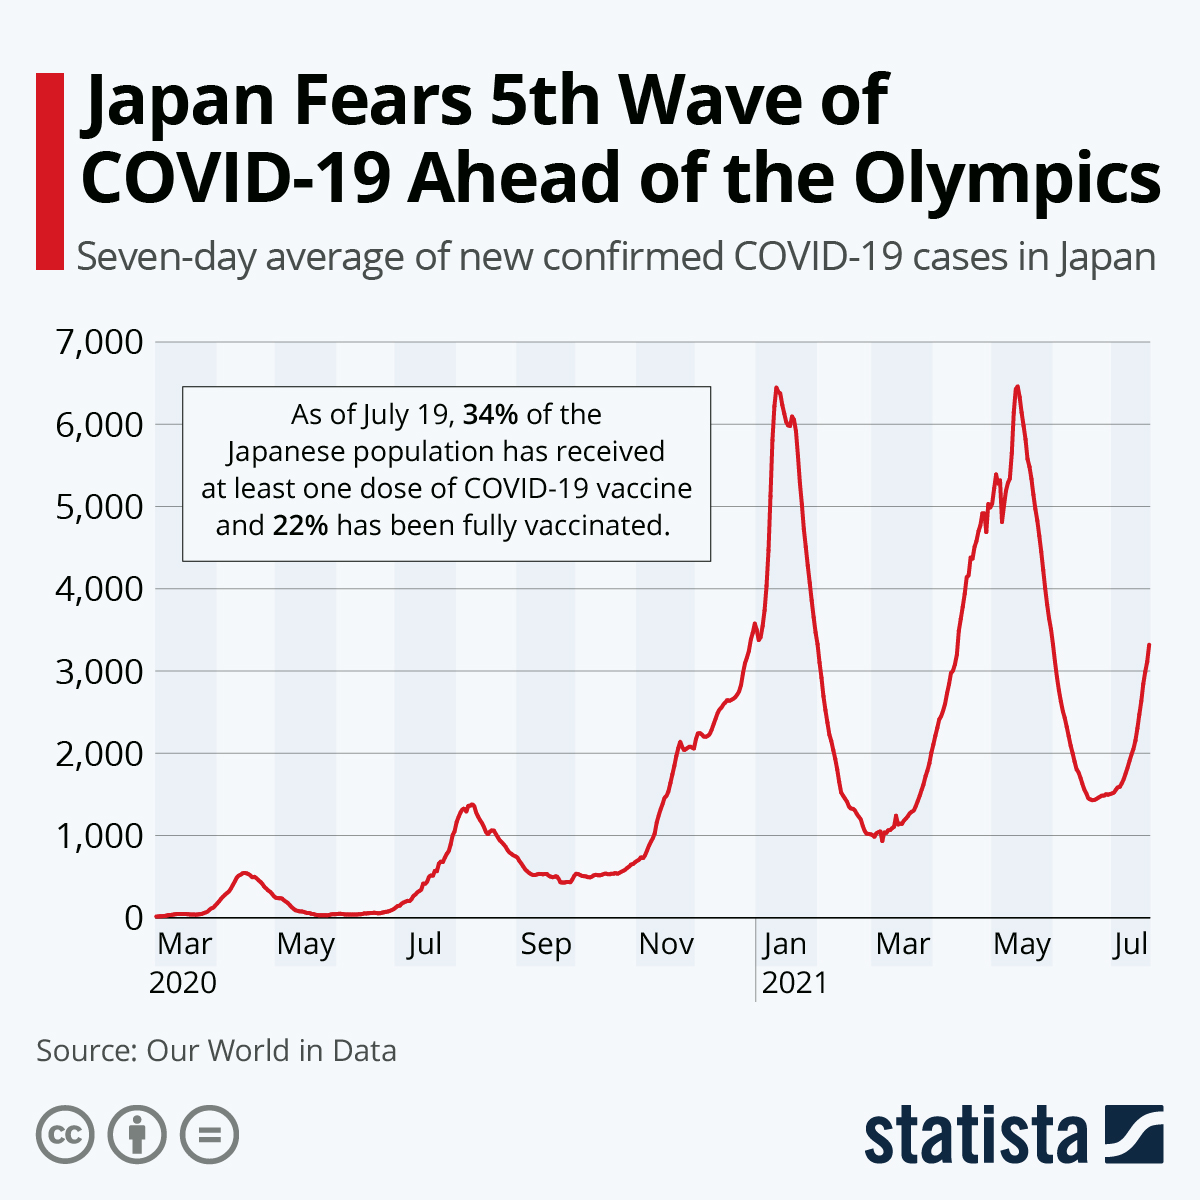 Japan Fears 5th Wave of COIVD-19 Ahead of the Olympics